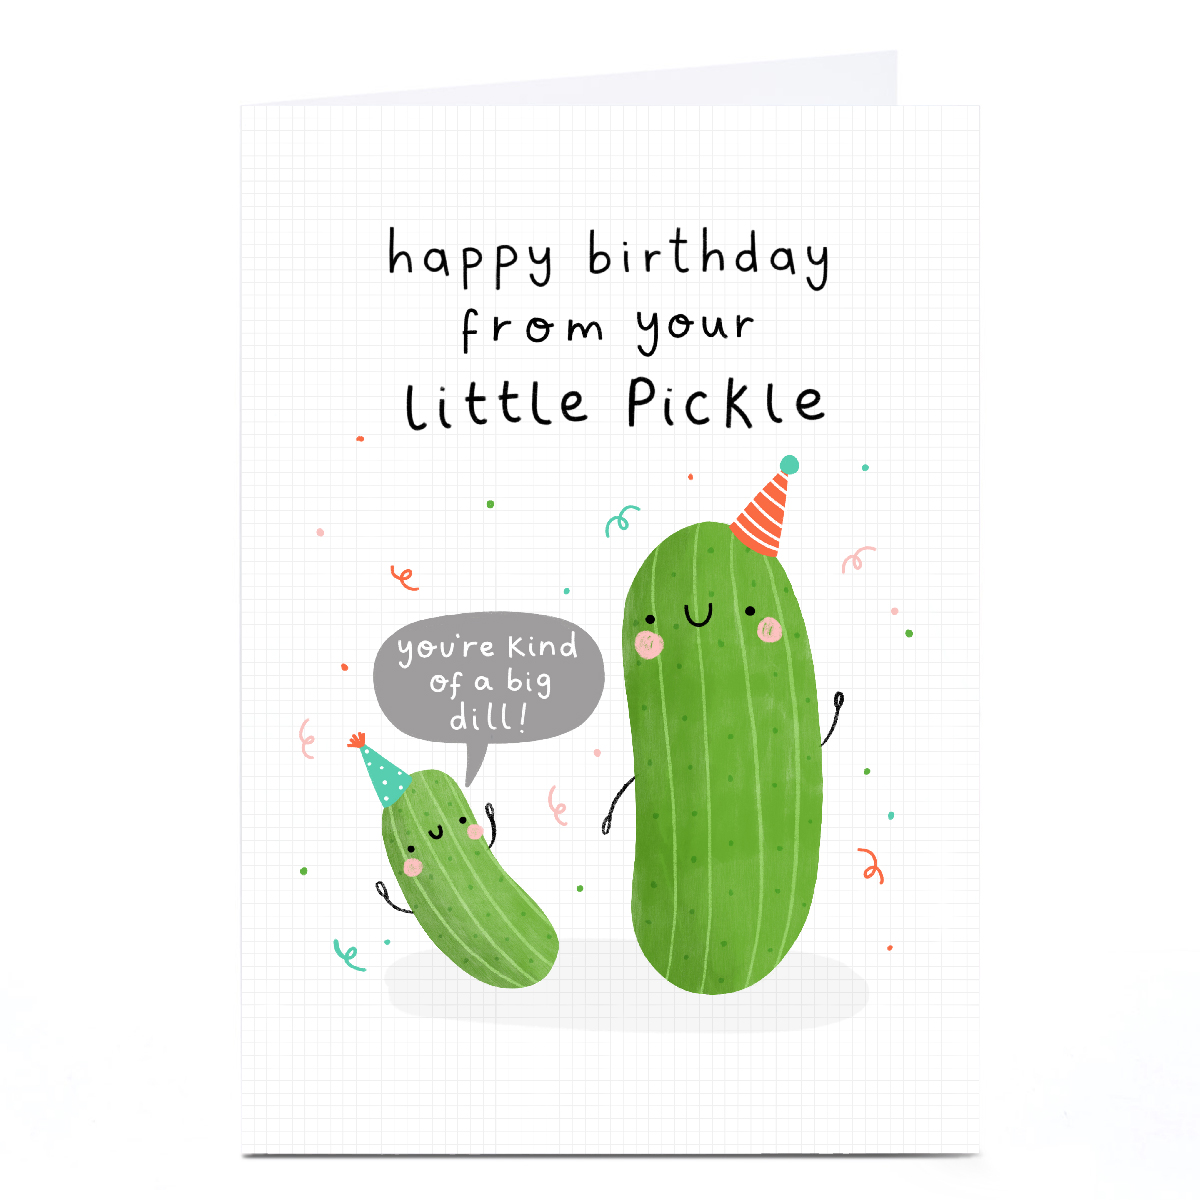 Personalised Jess Moorhouse Birthday Card - From Your Little Pickle